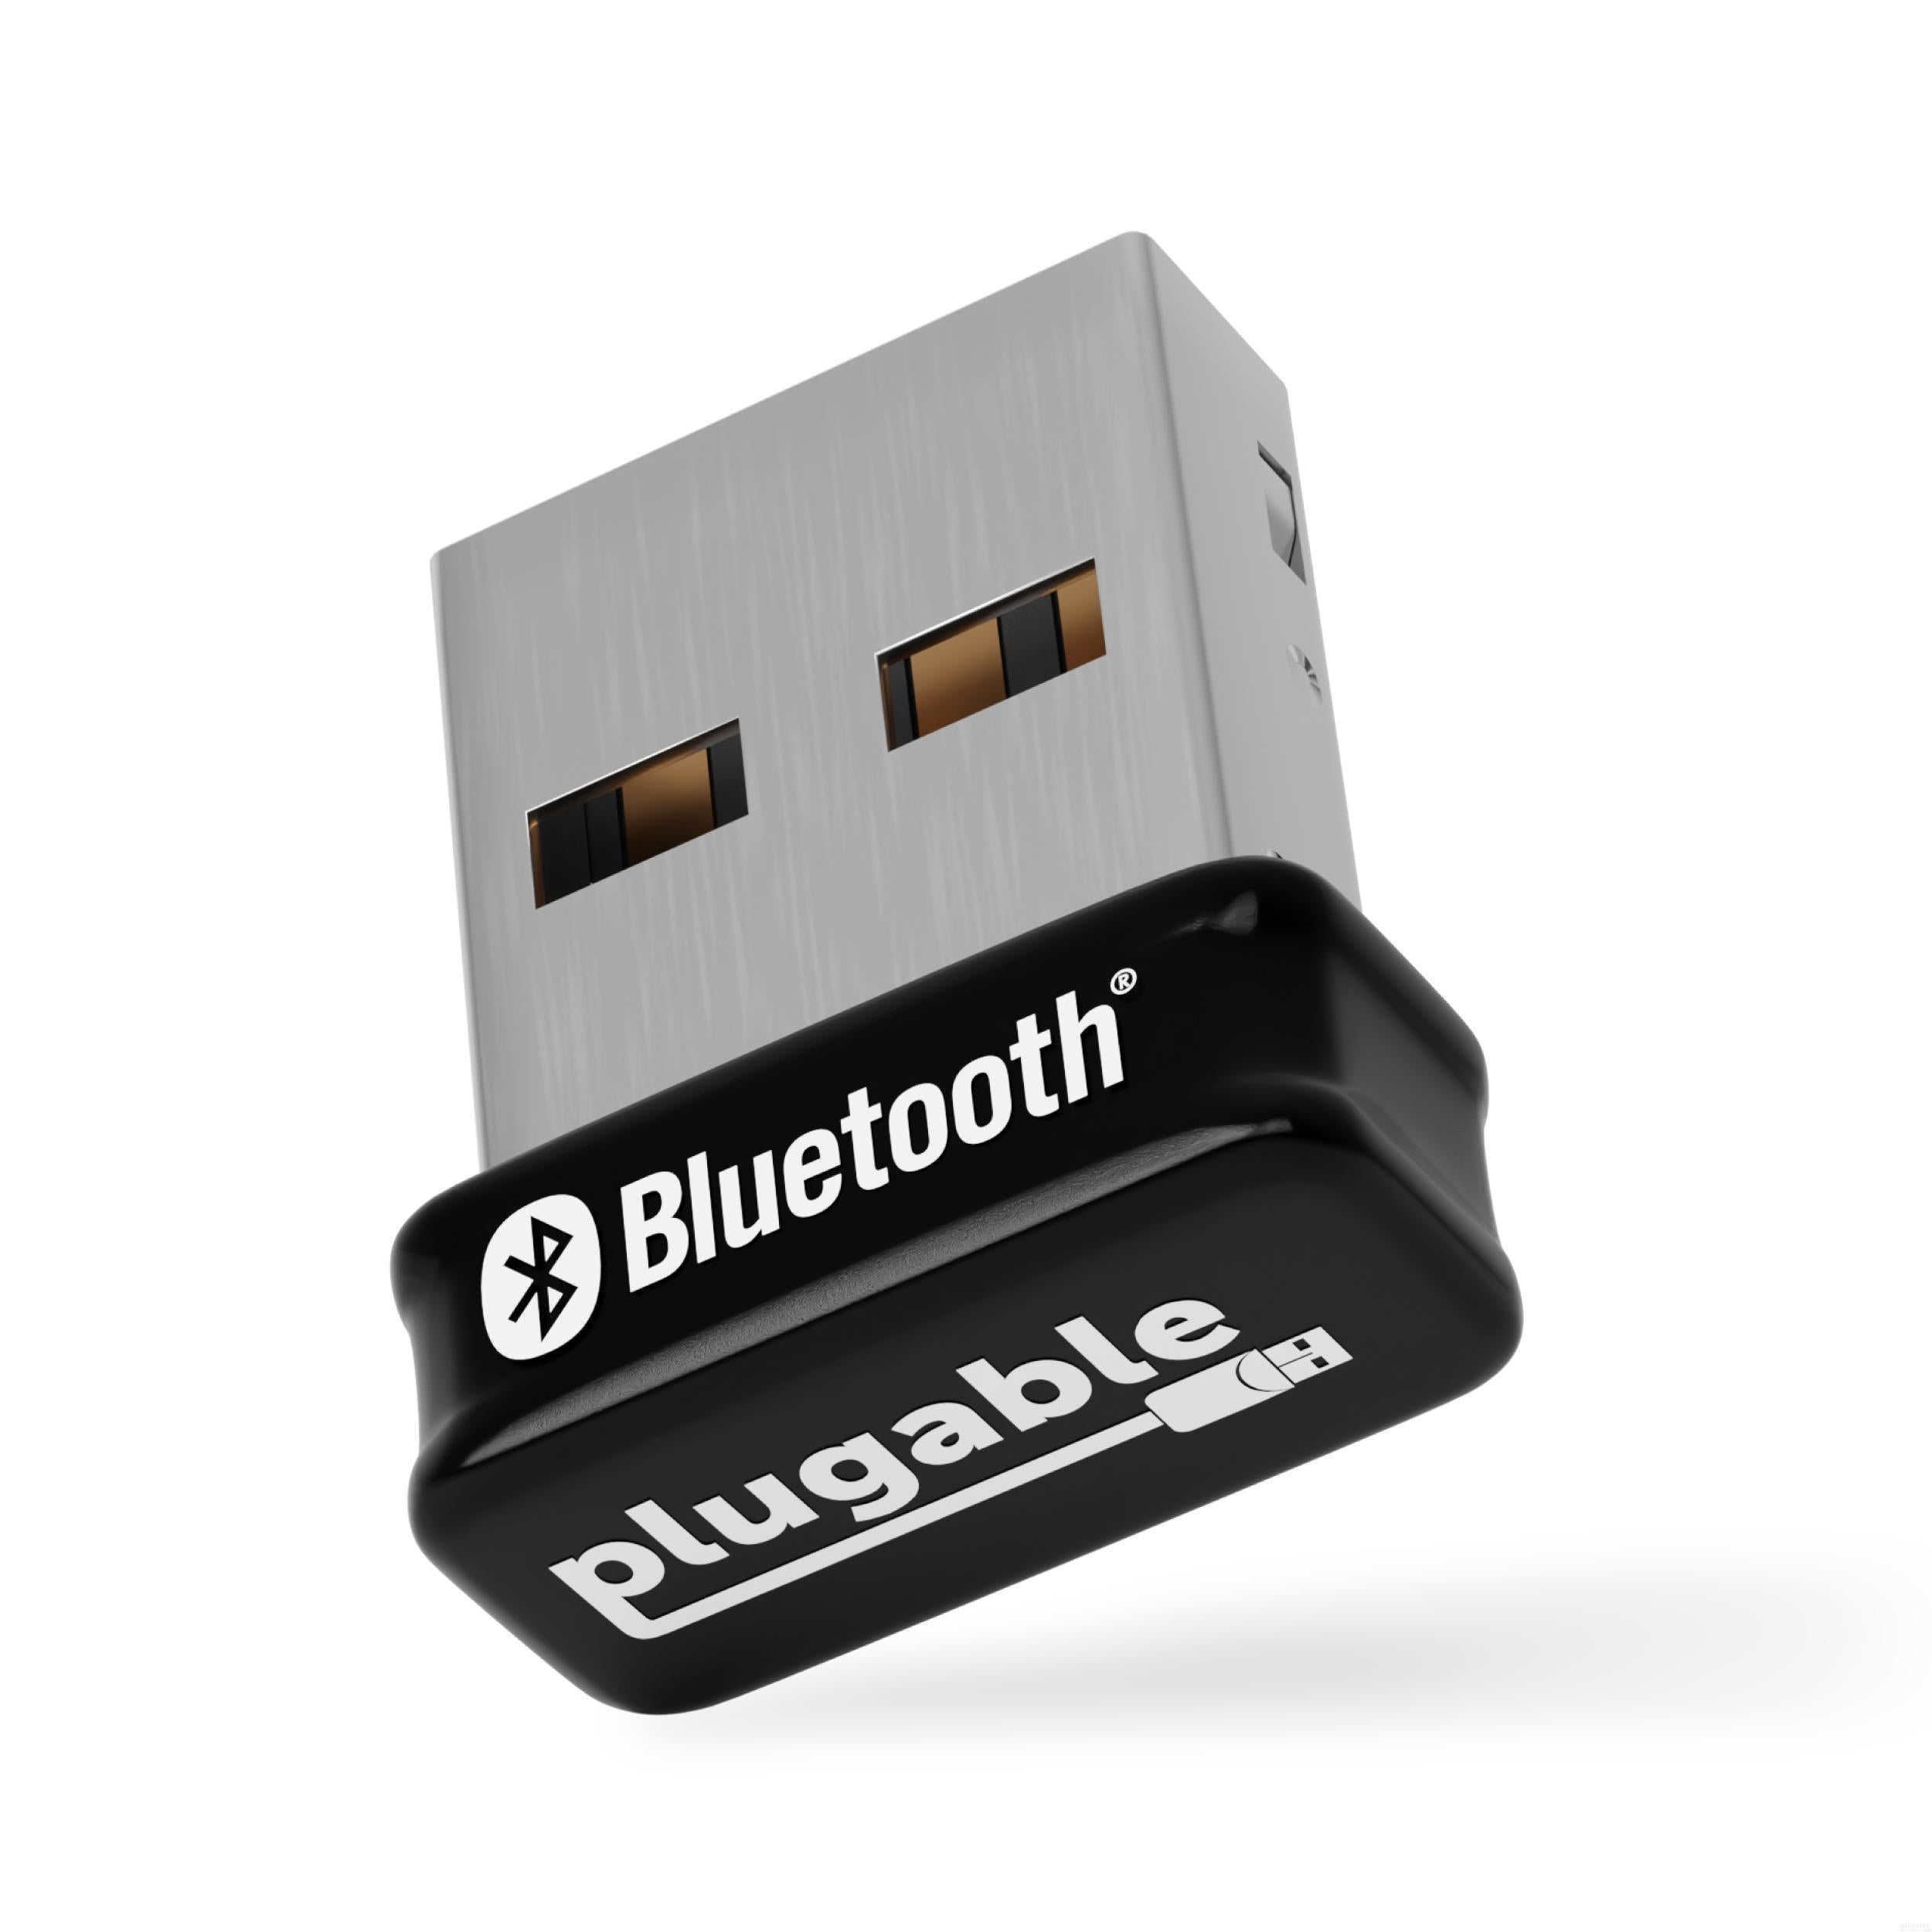 Bluetooth Adapter for PC, USB Mini Bluetooth 5.0 EDR Dongle for Computer  Desktop